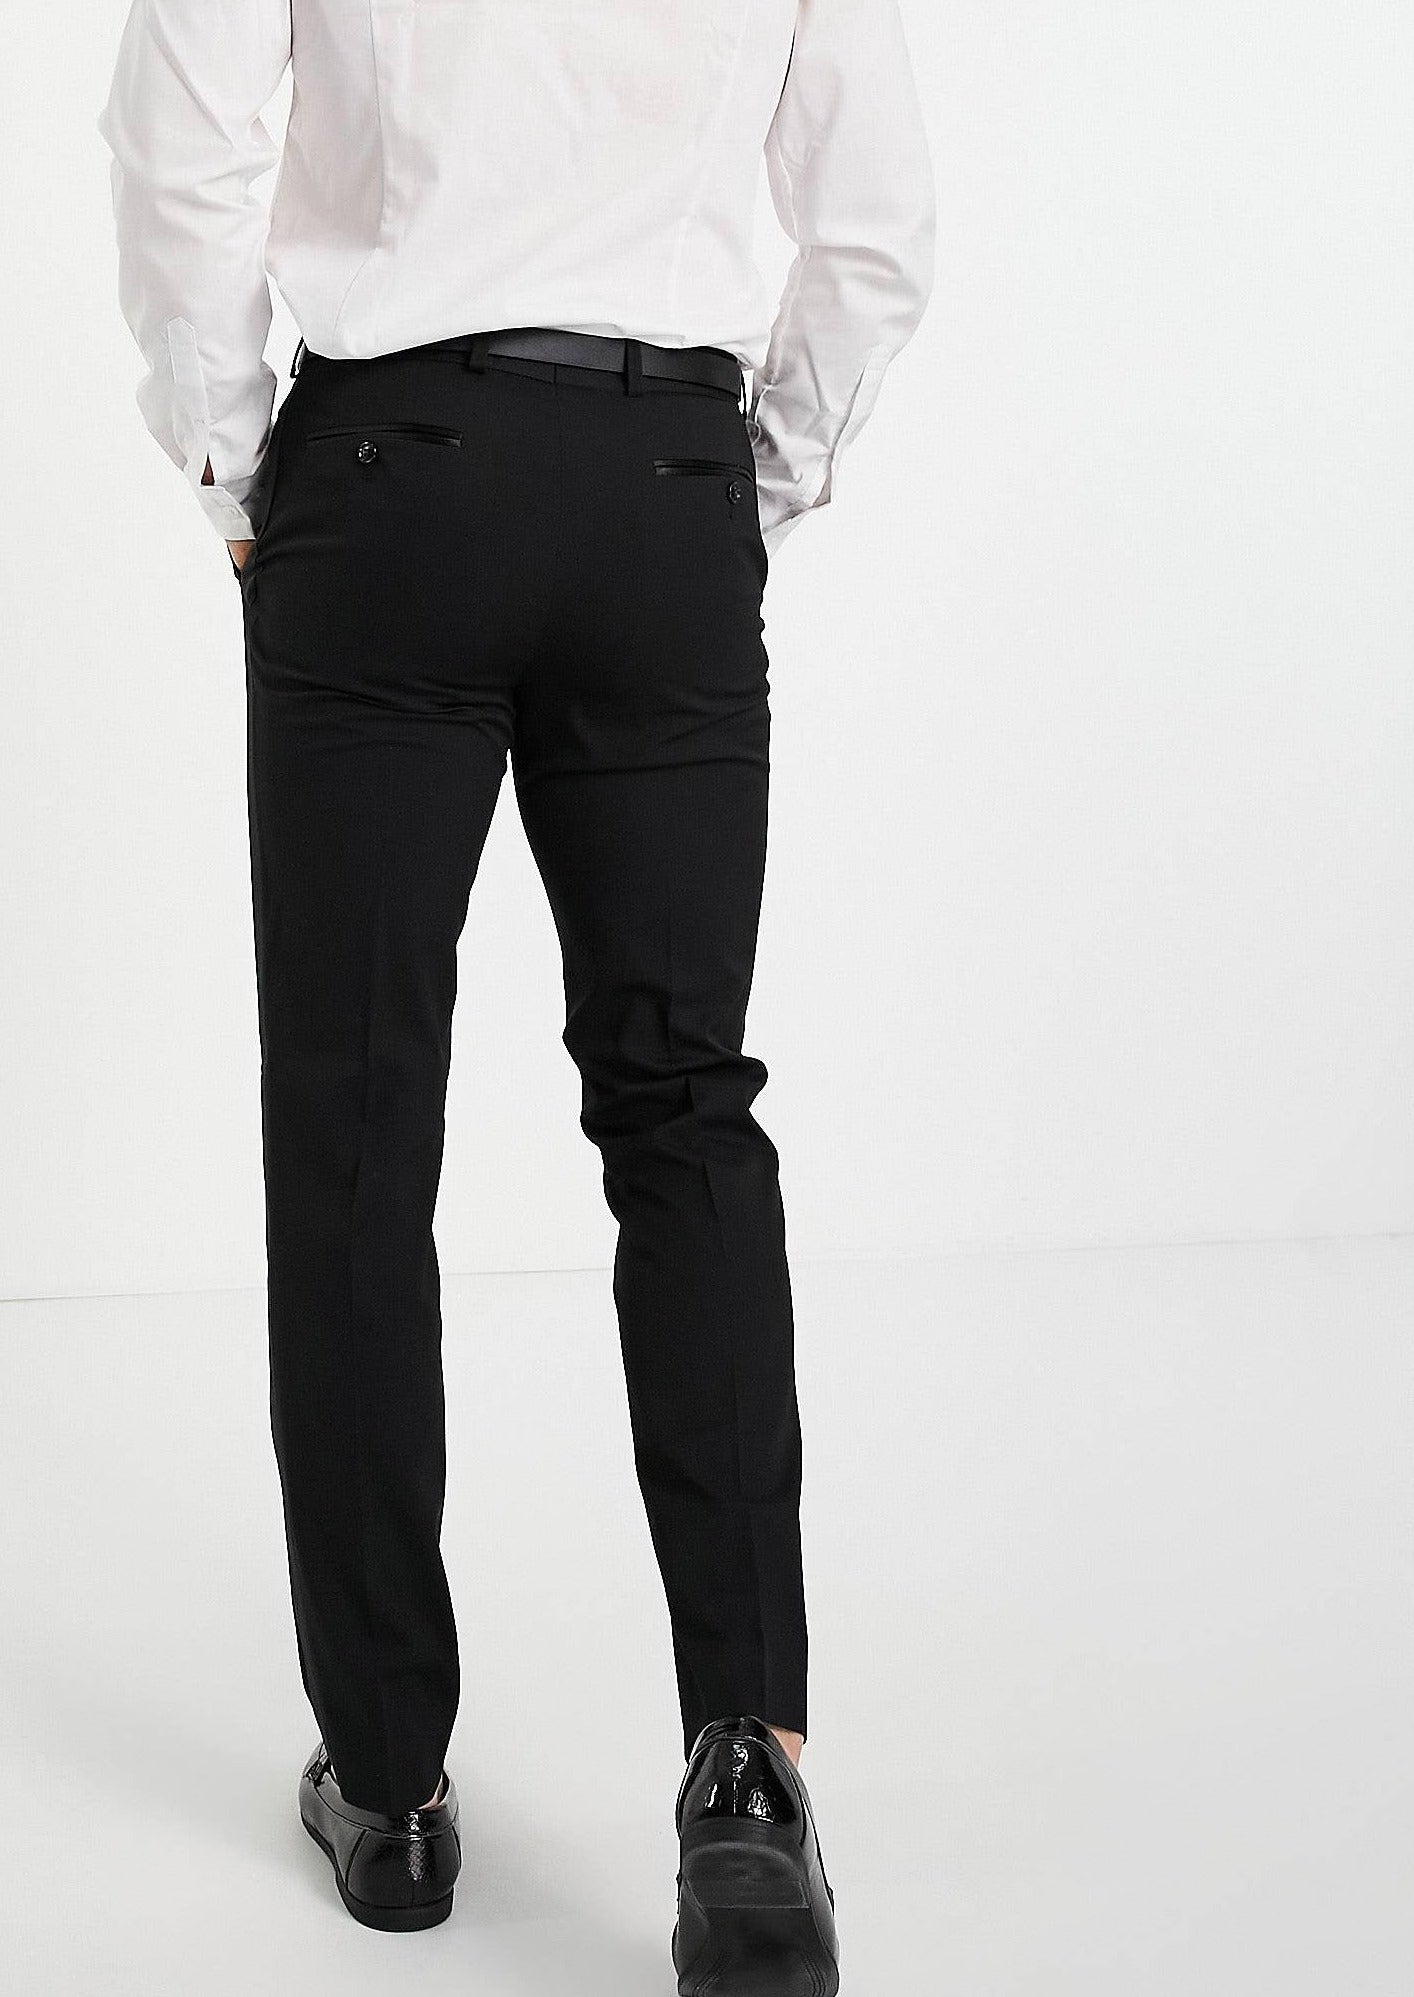 Buy Men's Cotton Mercerised Solid Black Trousers | Cotstyle